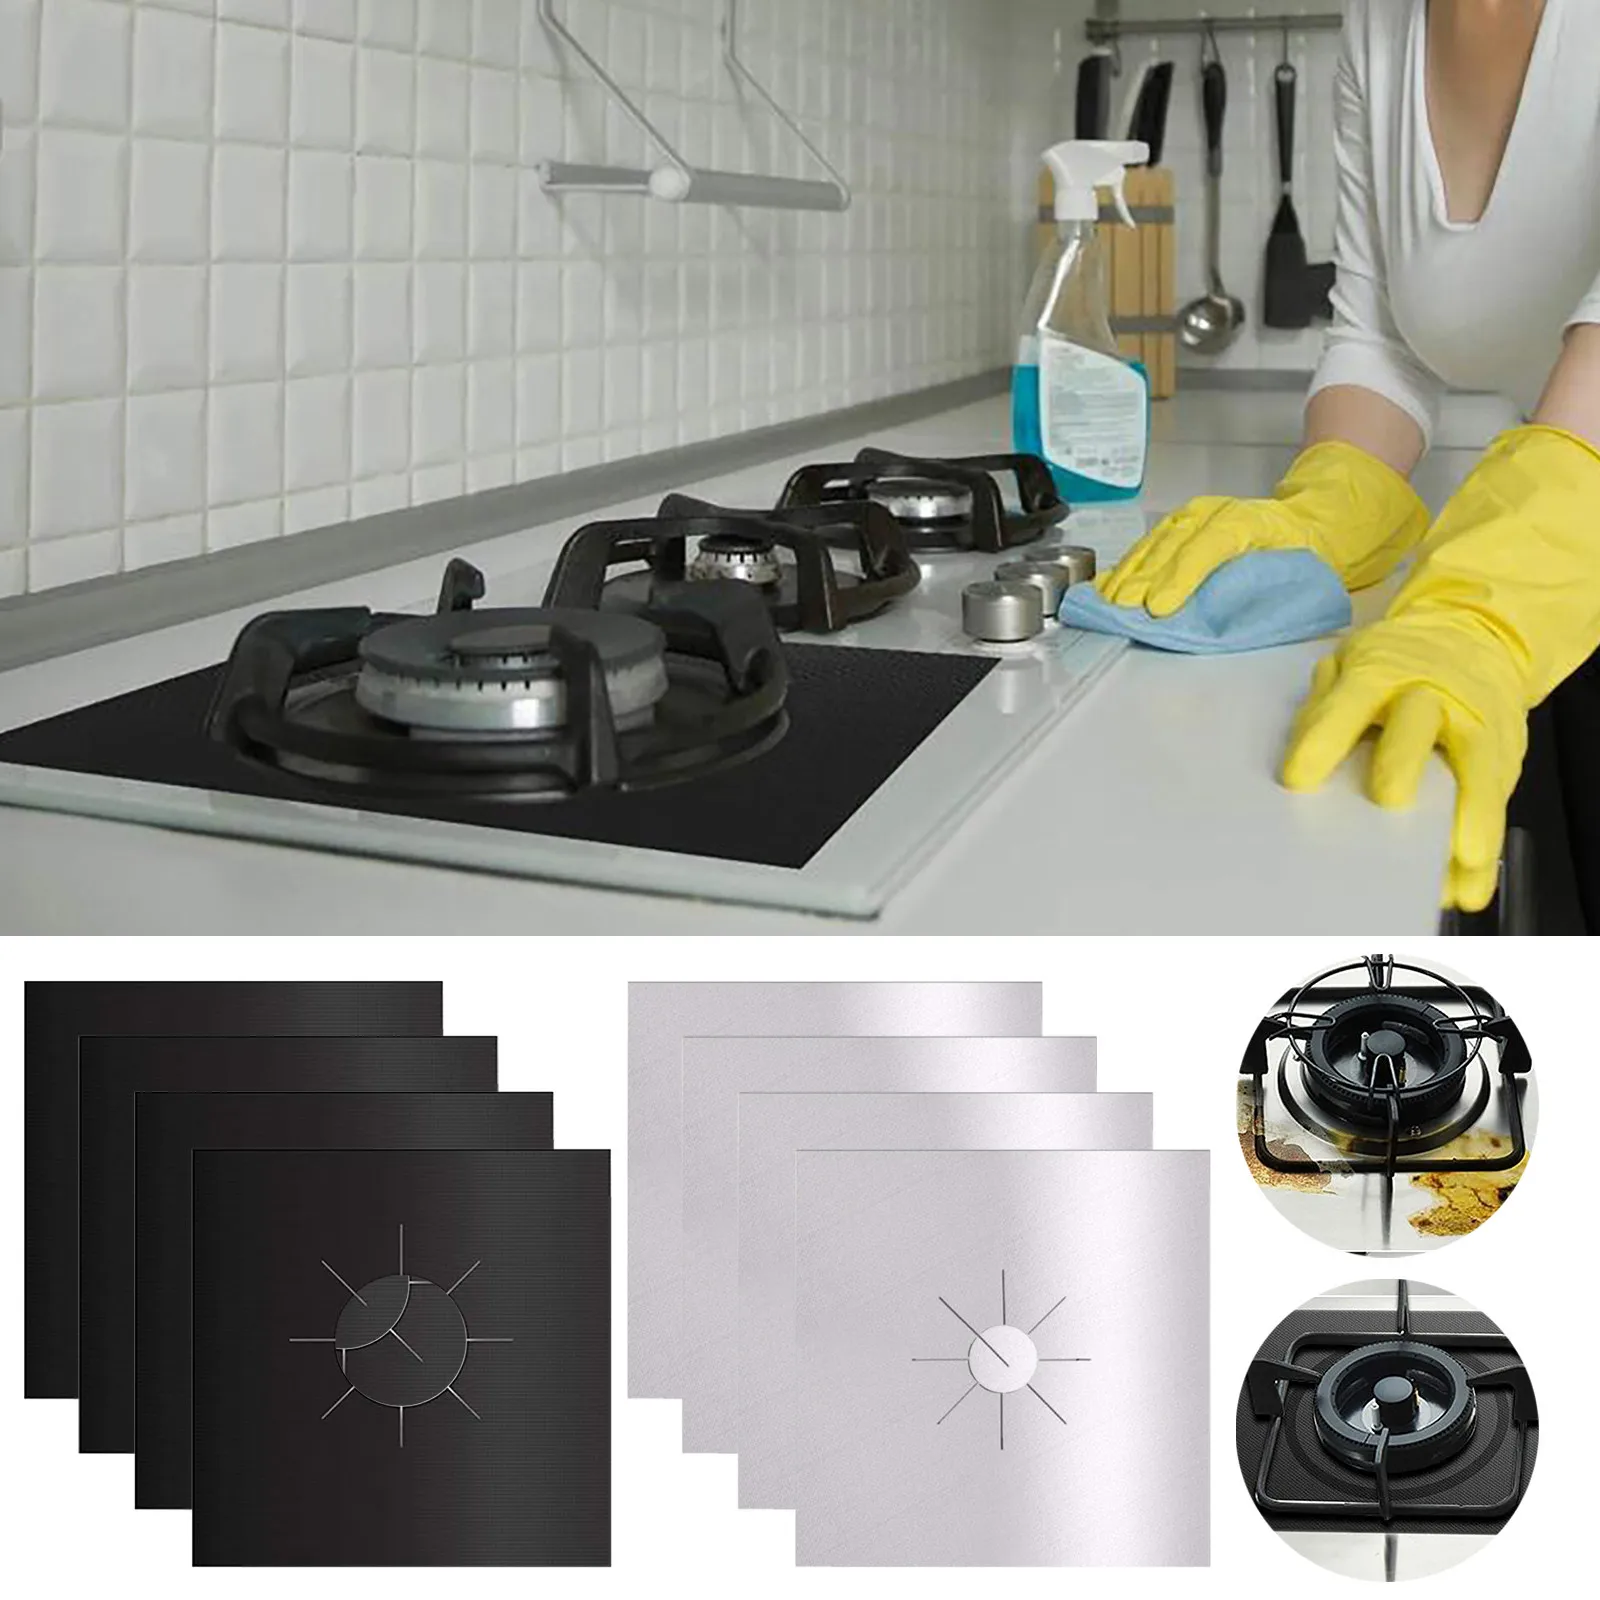 Stove Burner Cover Cuttable Stove Burner Lining for Kitchen Double-Thick Reusable Non-Stick Heat-Resistant Gas Stove Protector 